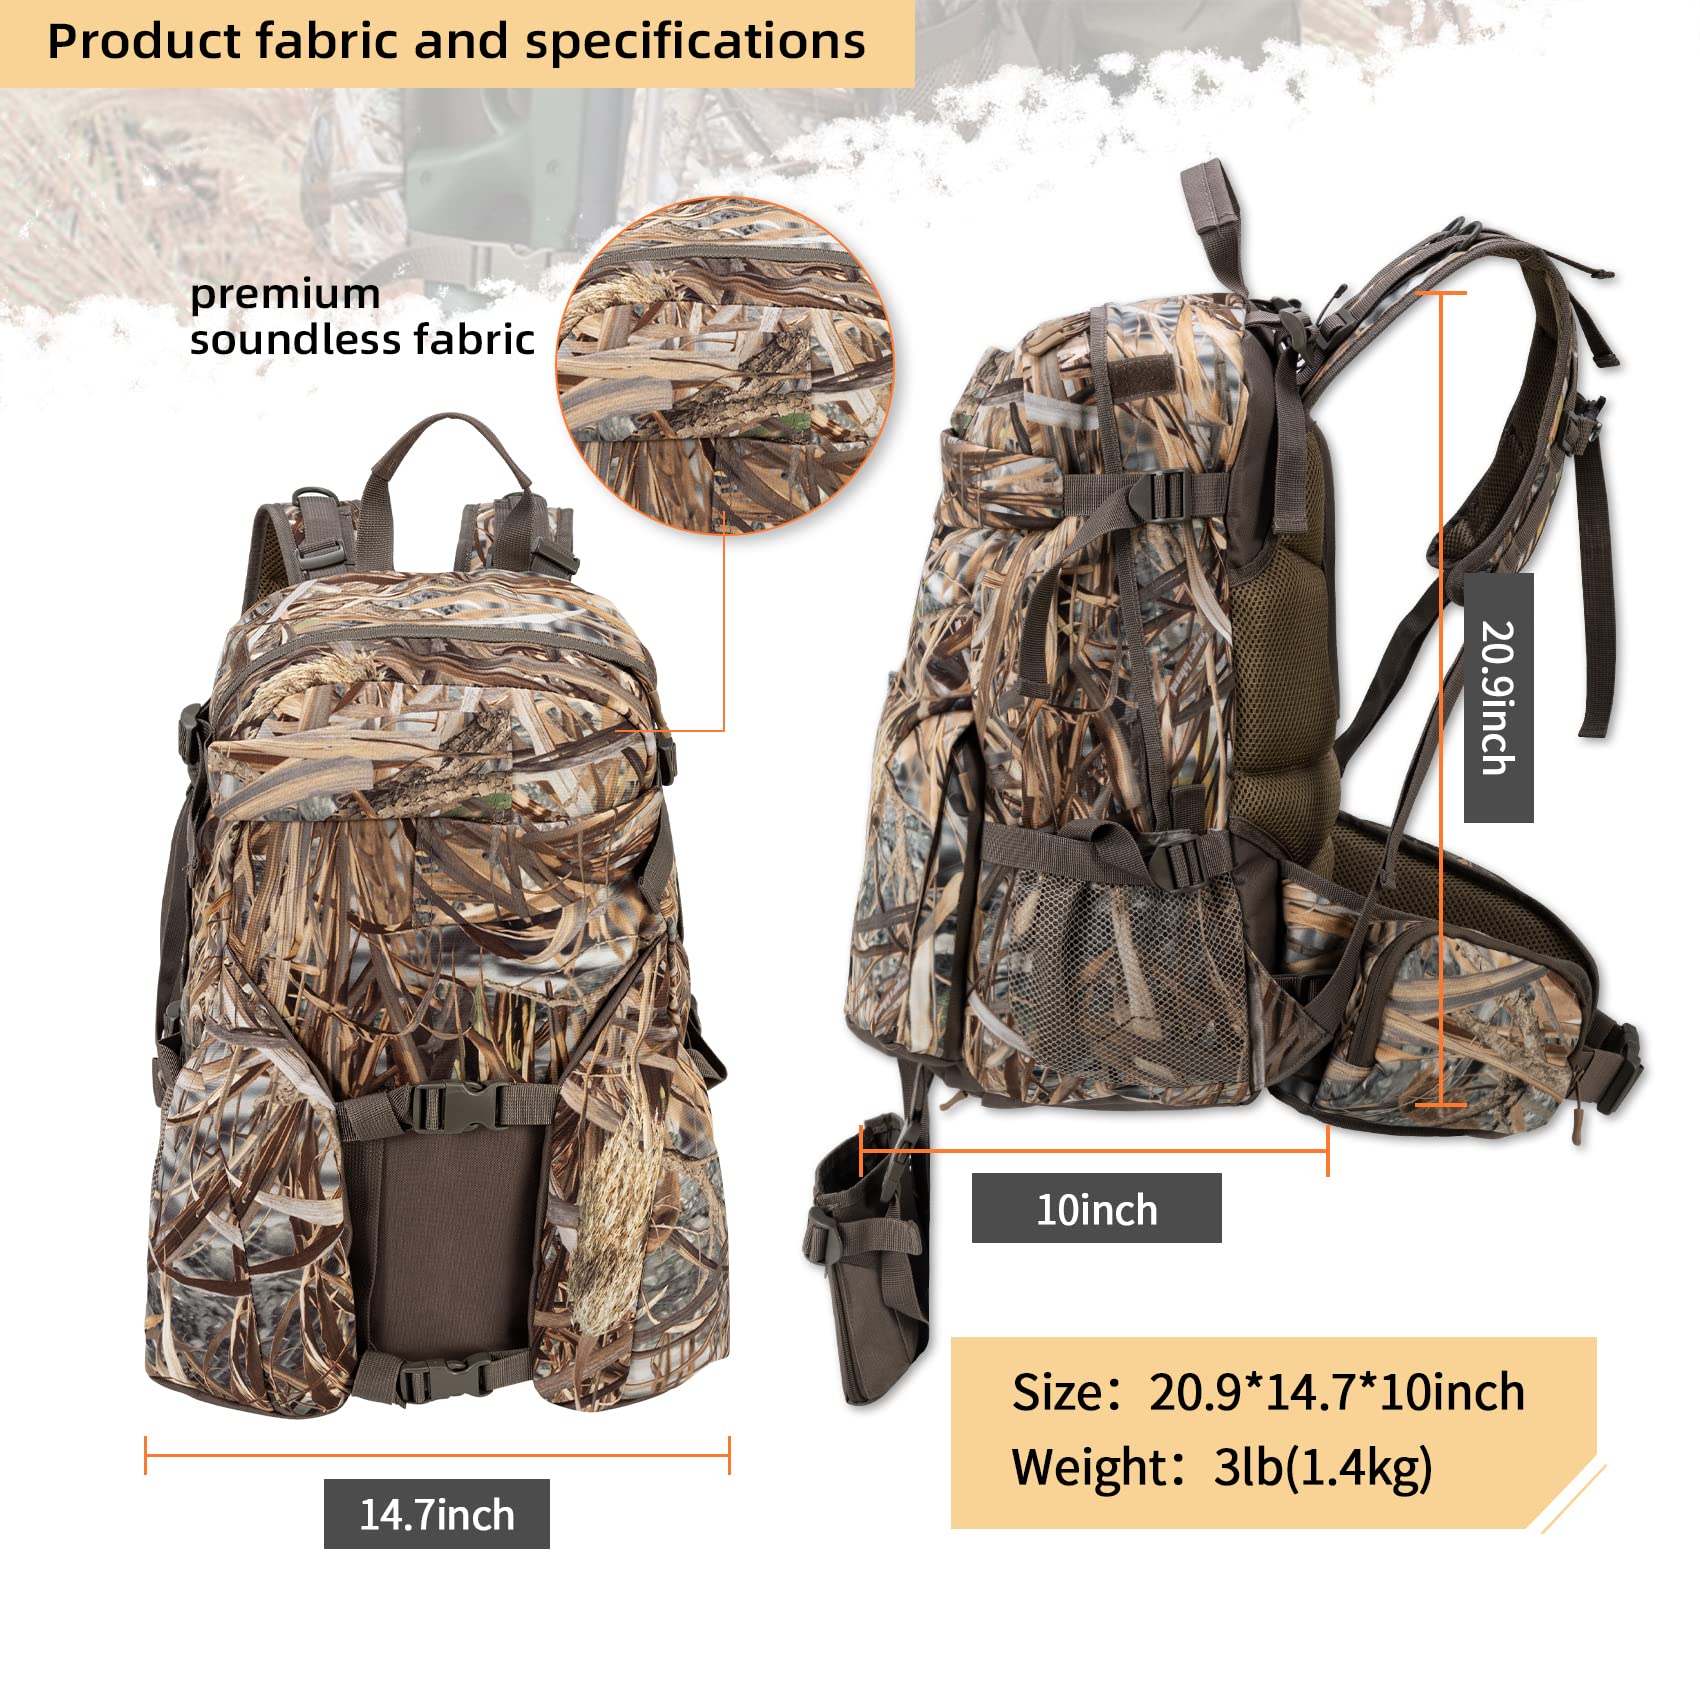 BLISSWILL Hunting Backpack Outdoor Gear Hunting Daypack for Rifle Bow Gun